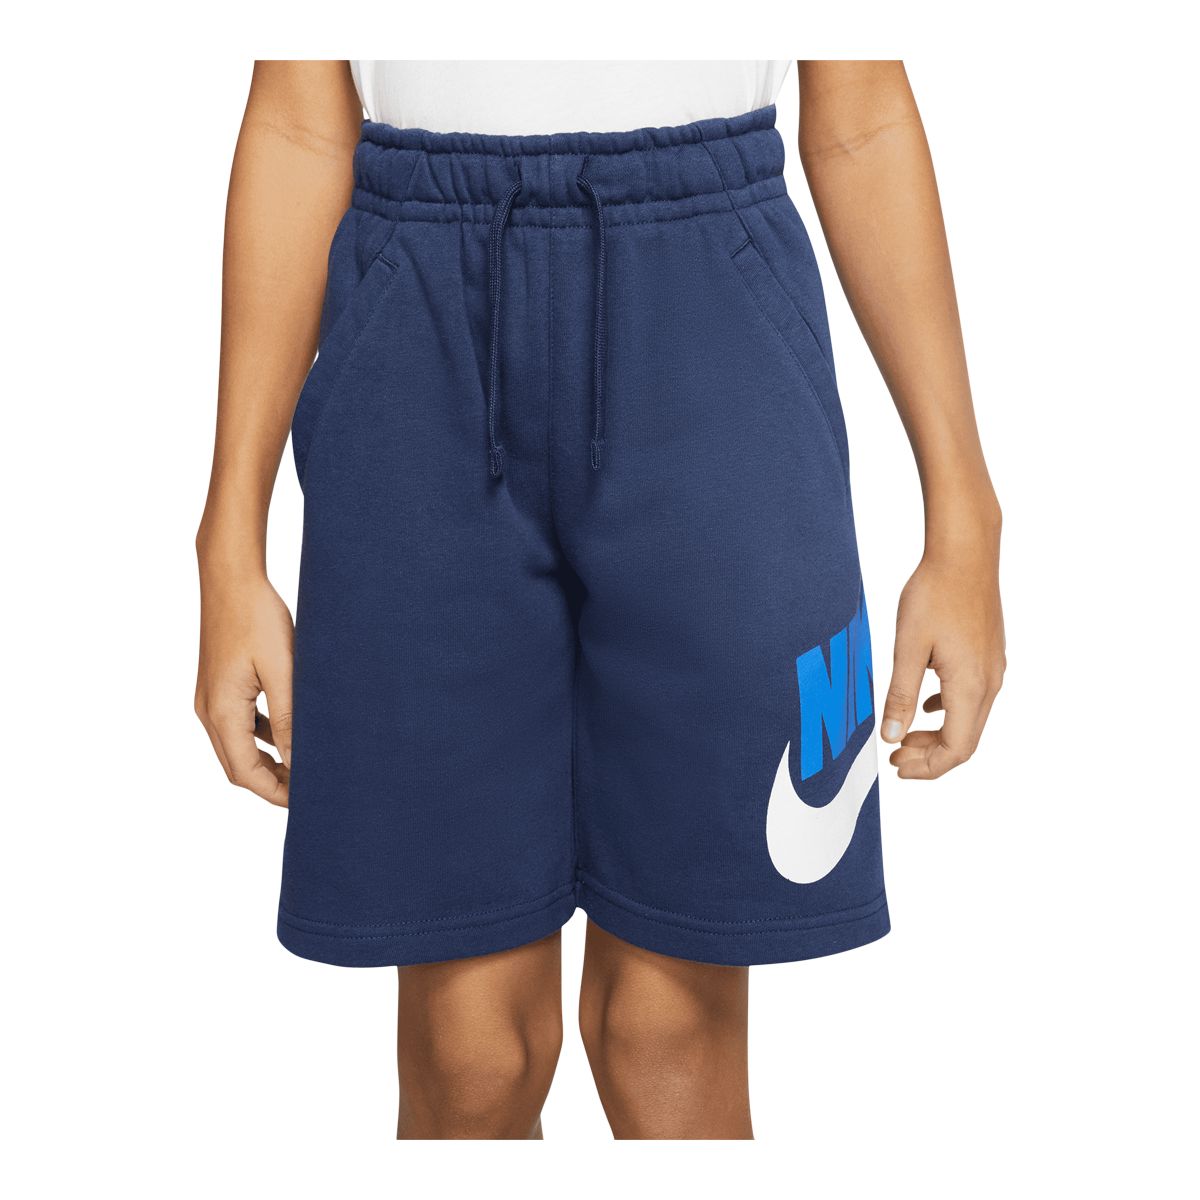 French | Club HBR Sportswear Centre Willowbrook Shopping Shorts Terry Nike Boys\'